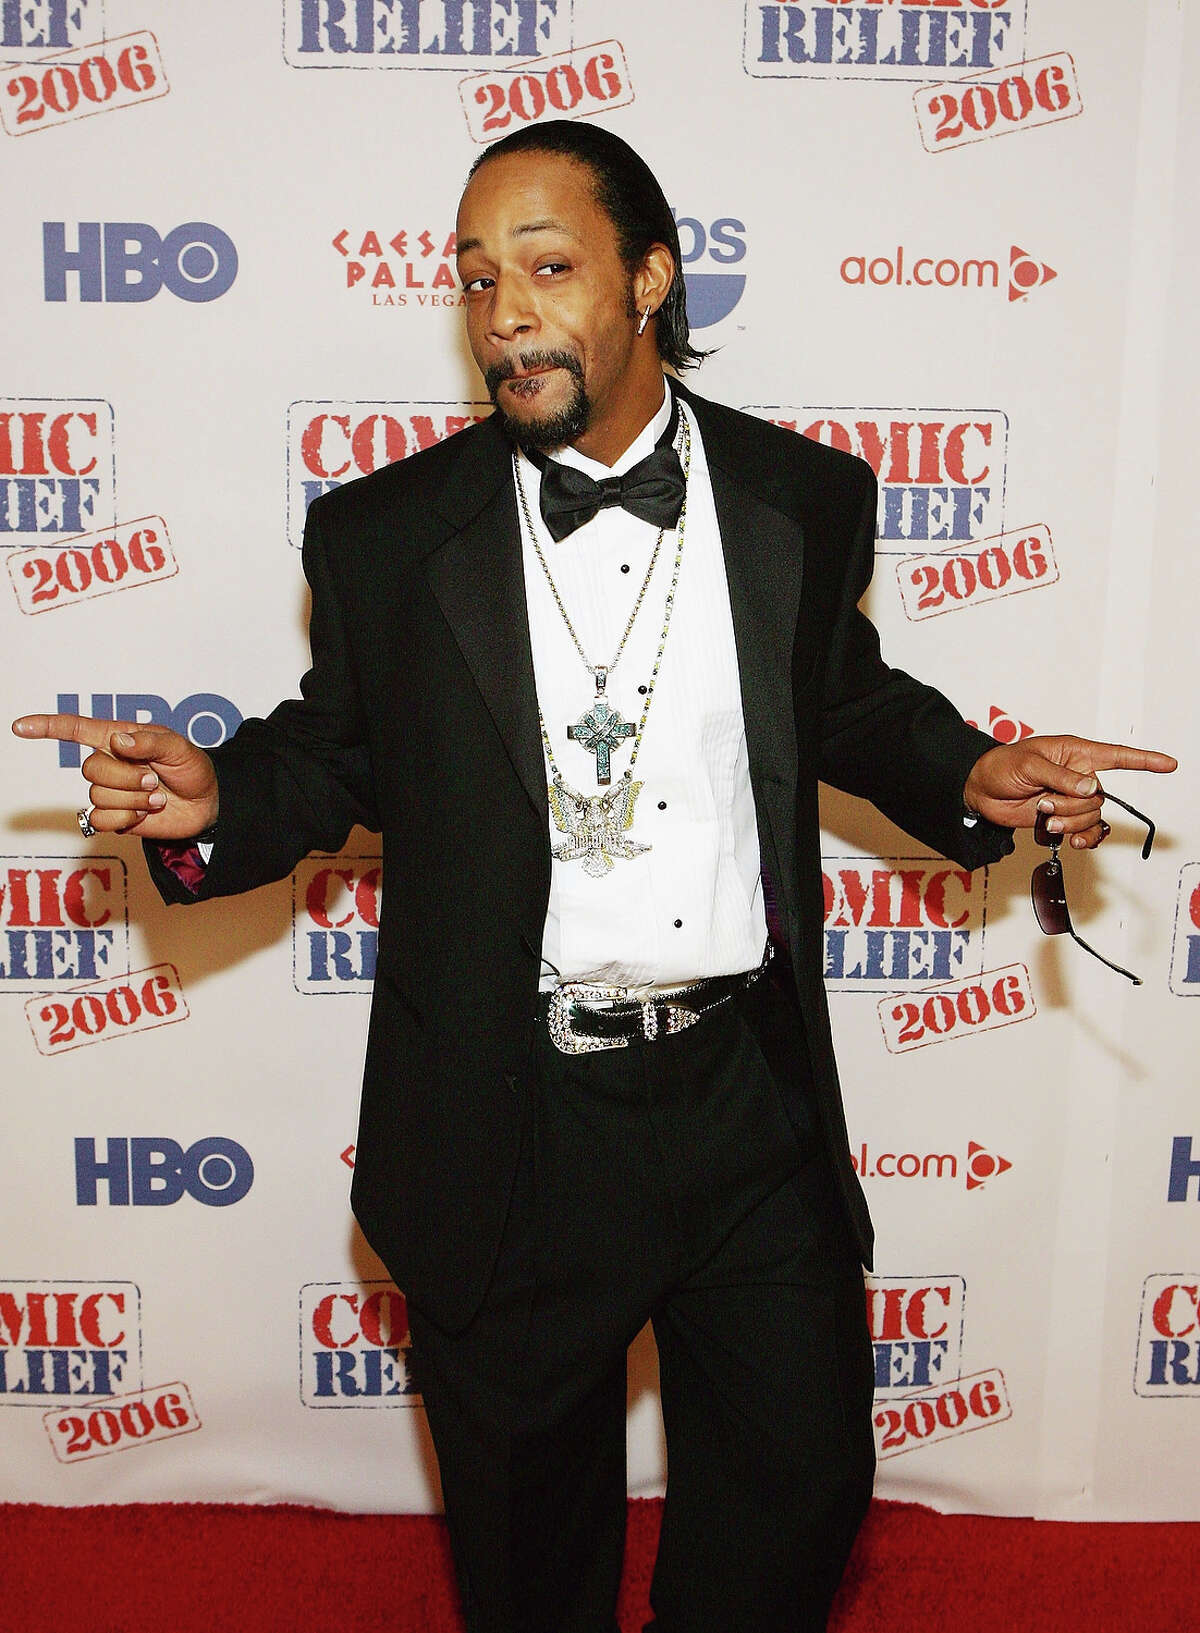 Comedian Katt Williams poses at the "Comic Relief 2006" show at The Colosseum at Caesars Palace November 18, 2006 in Las Vegas, Nevada. The benefit was held to help families in the Gulf Coast affected by Hurricane Katrina.